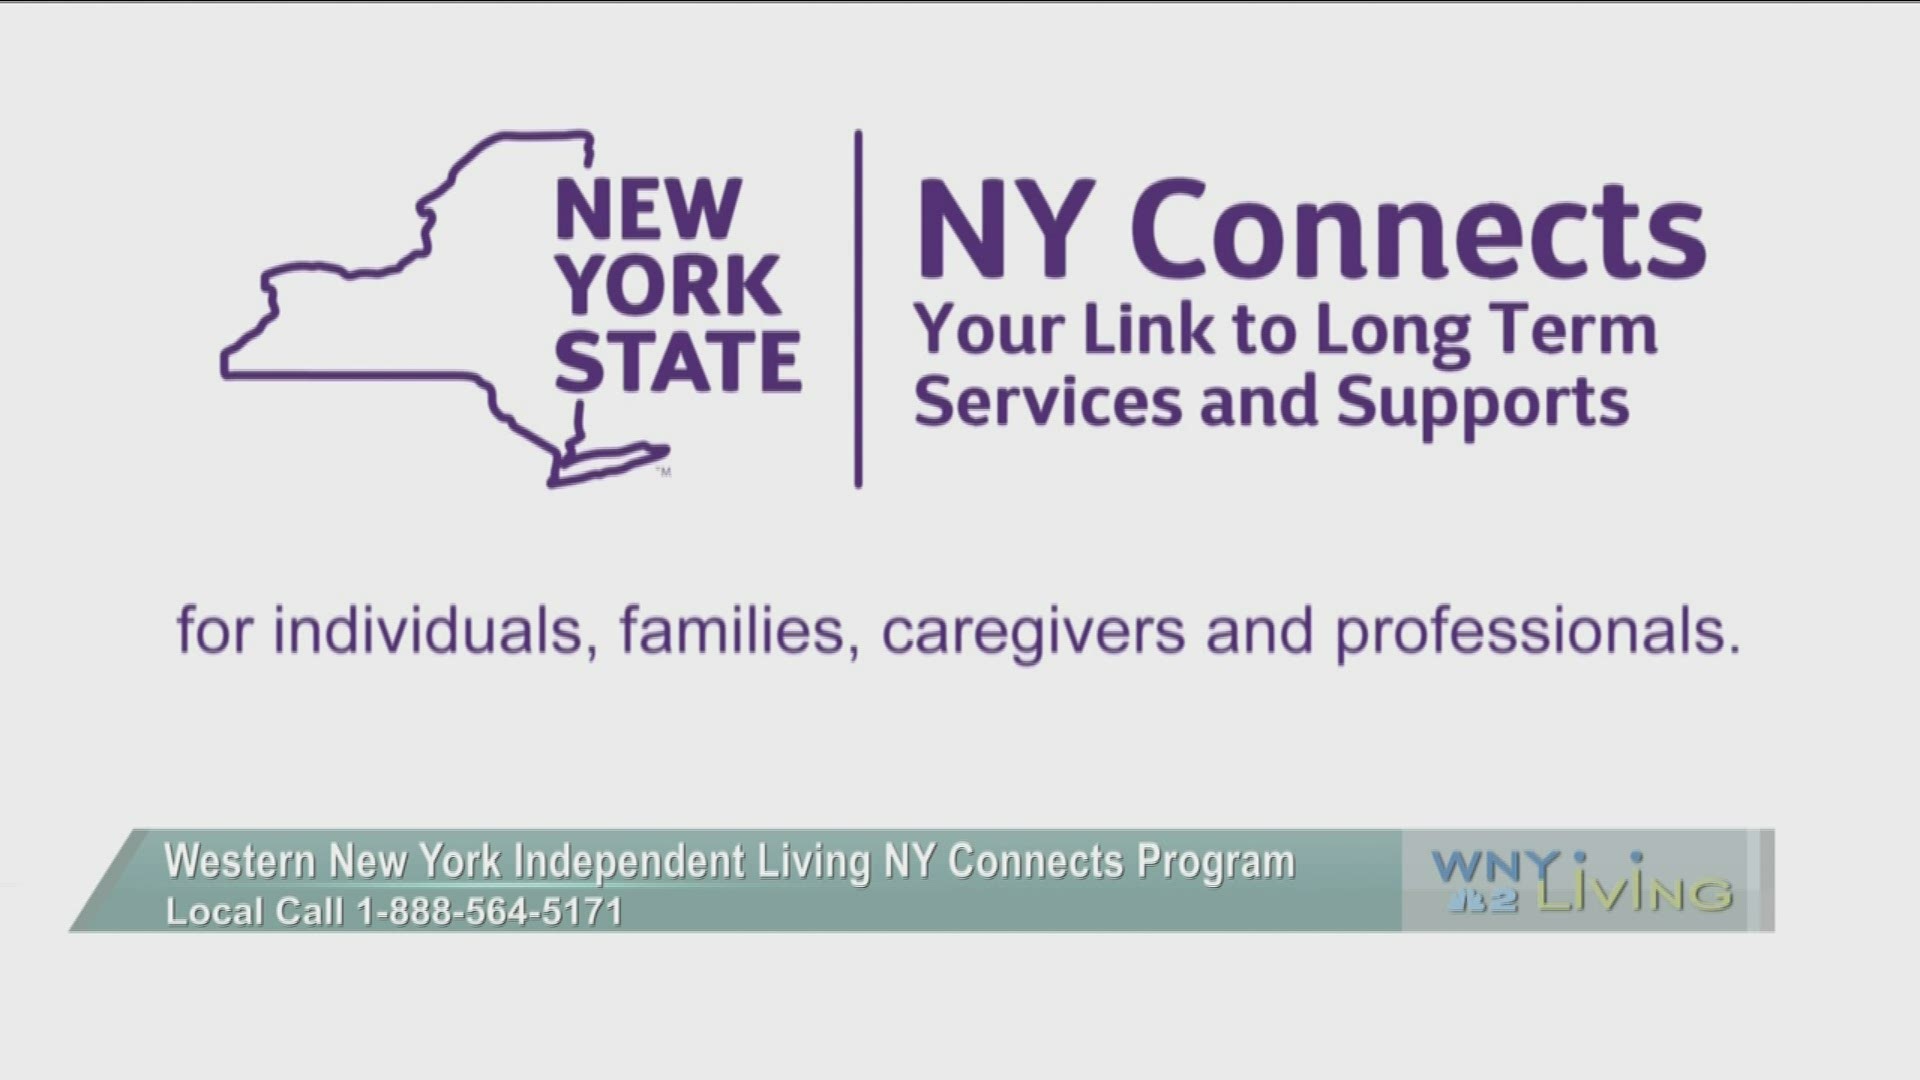 November 16 - Western New York Independent Living NY Connects Program (THIS VIDEO IS SPONSORED BY WESTERN NEW YORK INDEPENDENT LIVING NY CONNECTS PROGRAM)